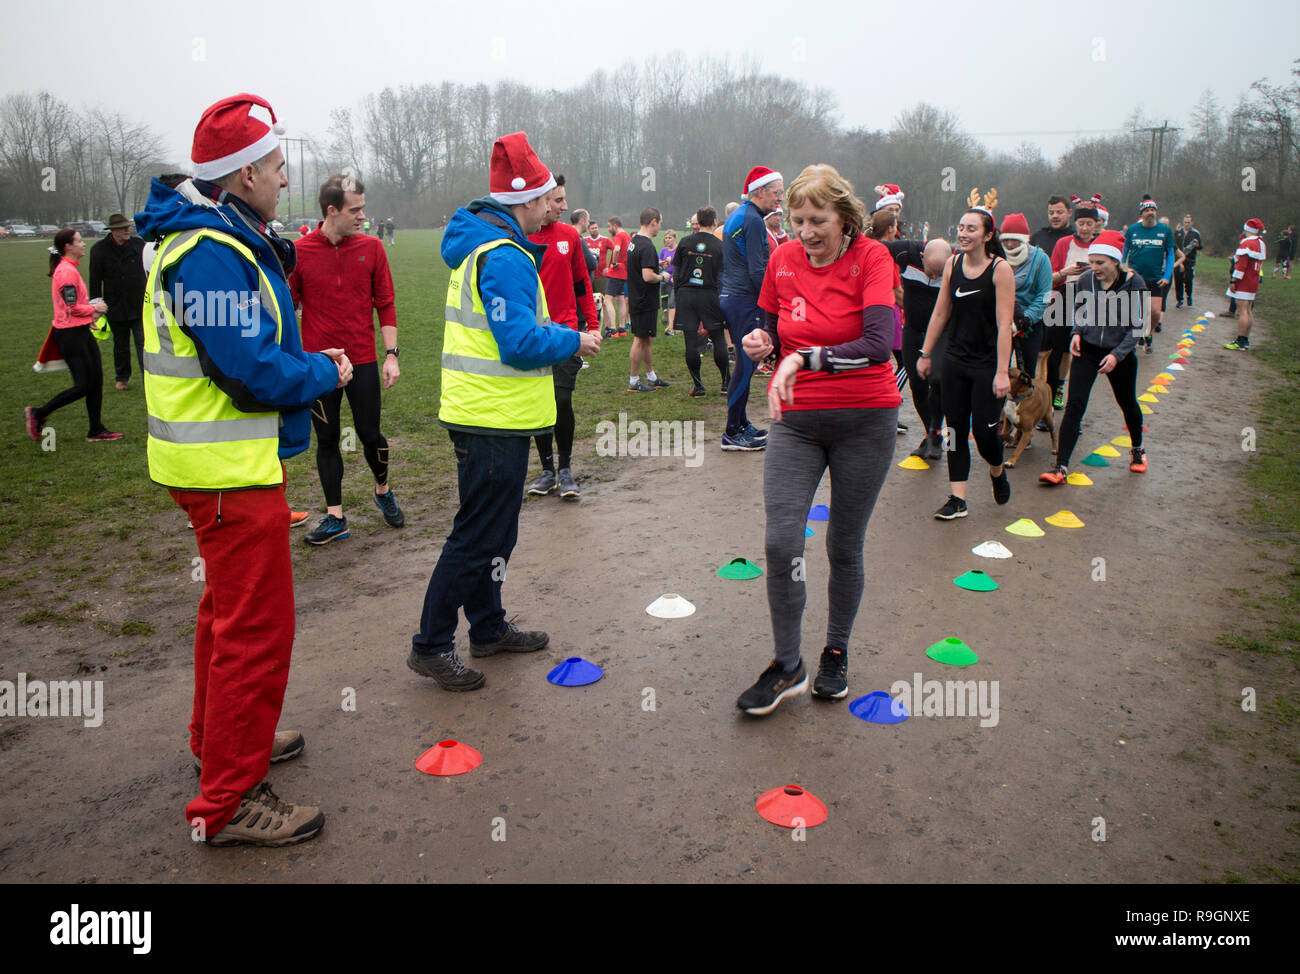 Redditch, Worcestershire, UK. 25th Dec, 2018. UK. Runners complete the Arrow Valley parkrun on Christmas morning. The run at Arrow Valley Country Park in Redditch, Worcestershire, on Christmas Day was held as an extra event to the normal Saturday morning 5k time trial. Credit: Colin Underhill/Alamy Live News Stock Photo